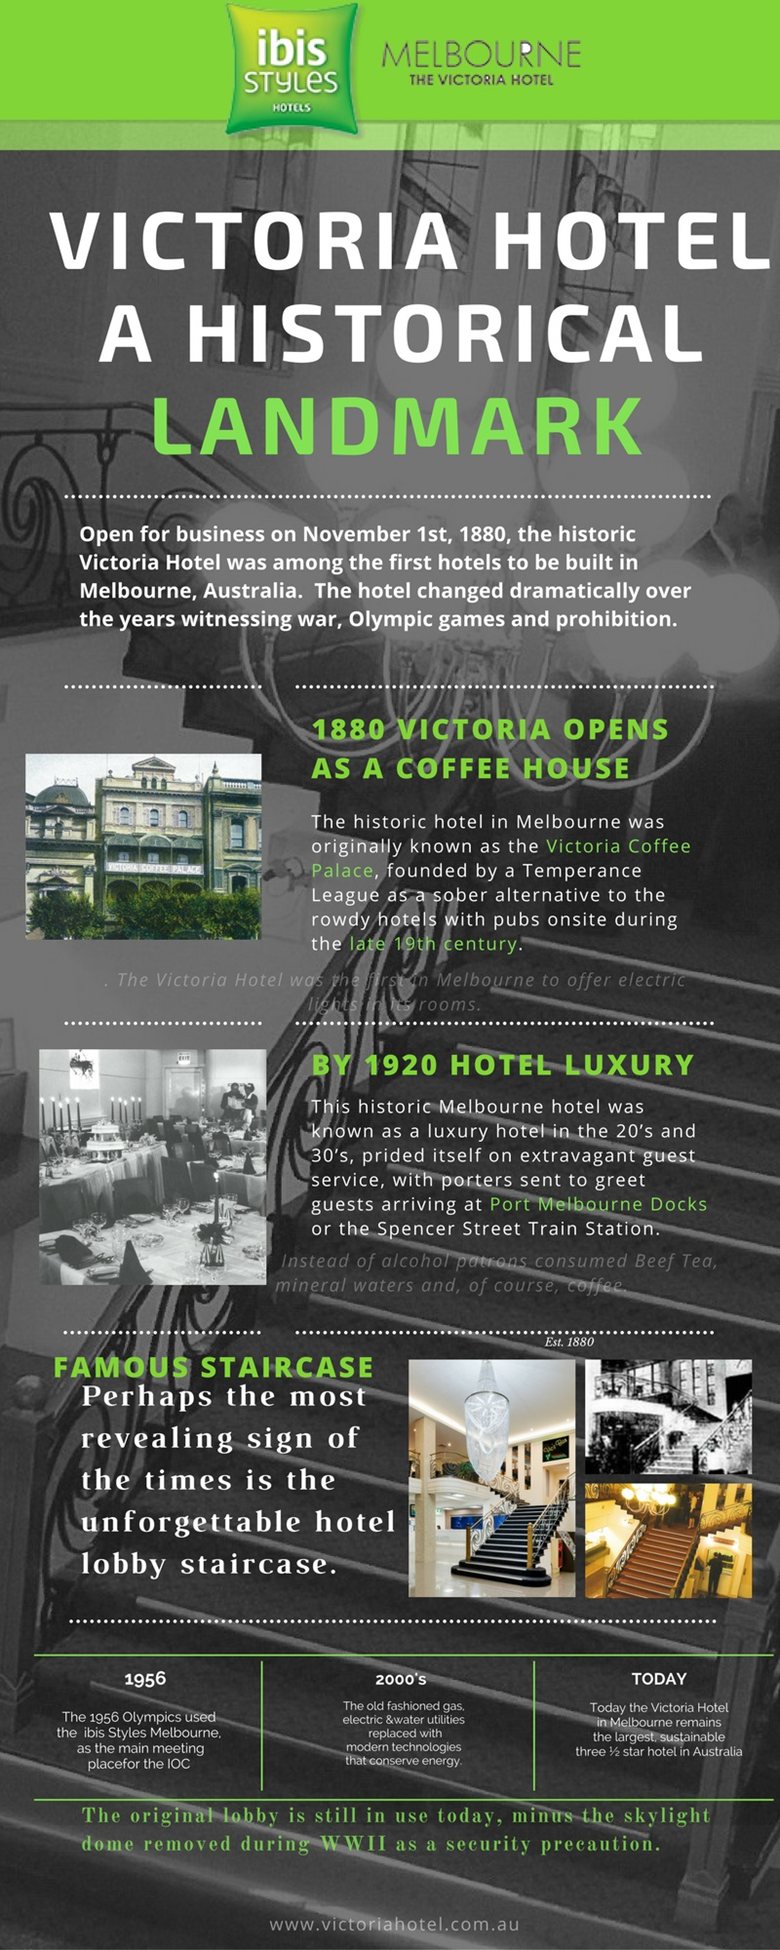 One Hundred Years of History at the ibis Styles Victoria Hotel in Melbourne